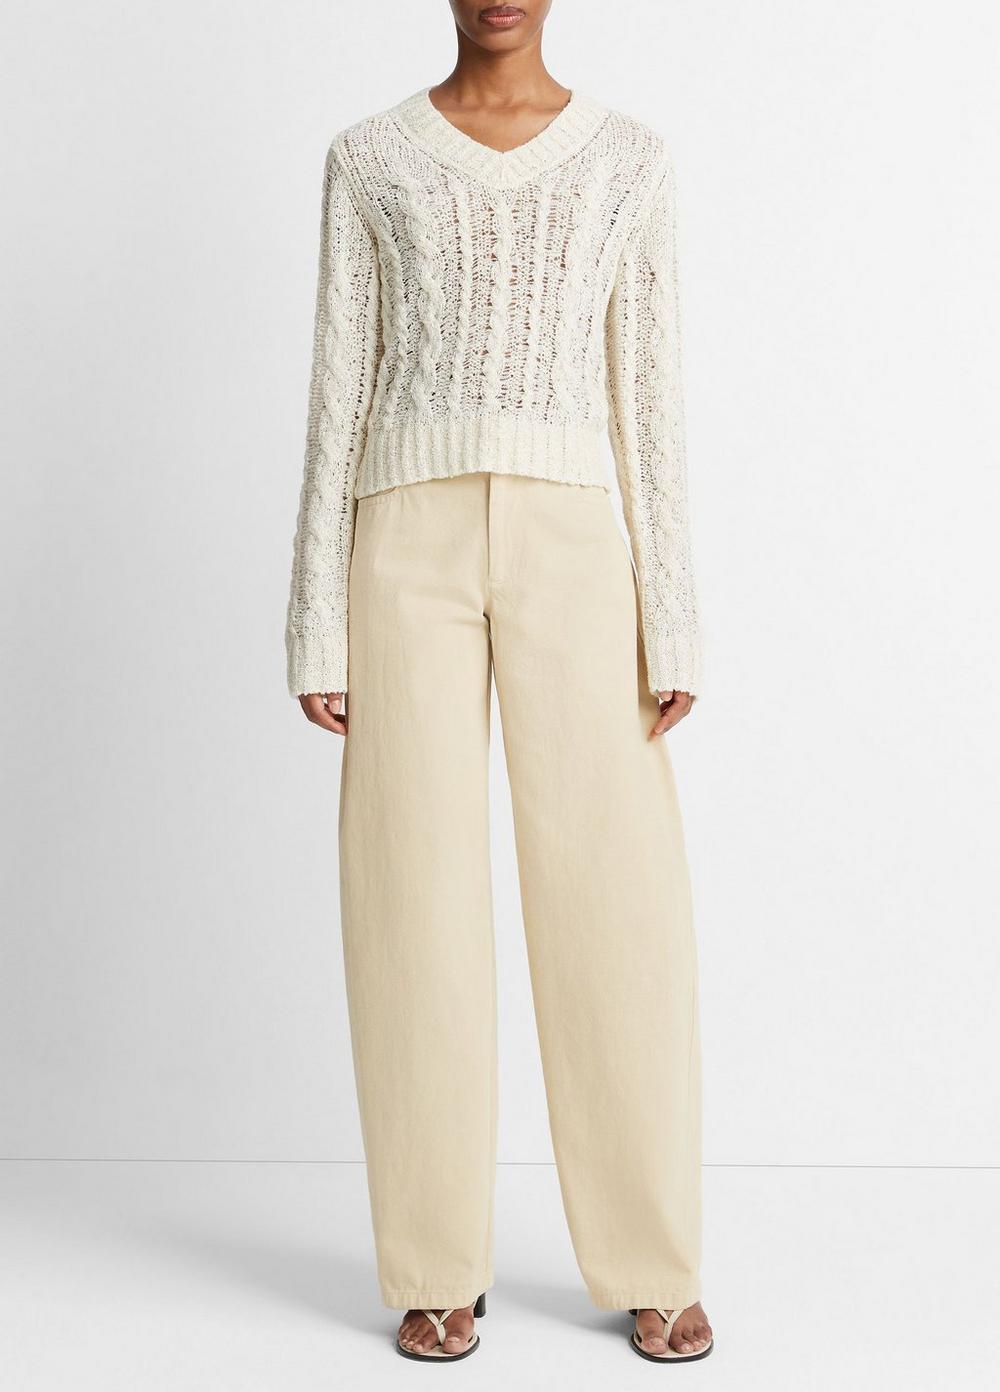 Textured Cable V-Neck Sweater, Cream, Size XXS Vince